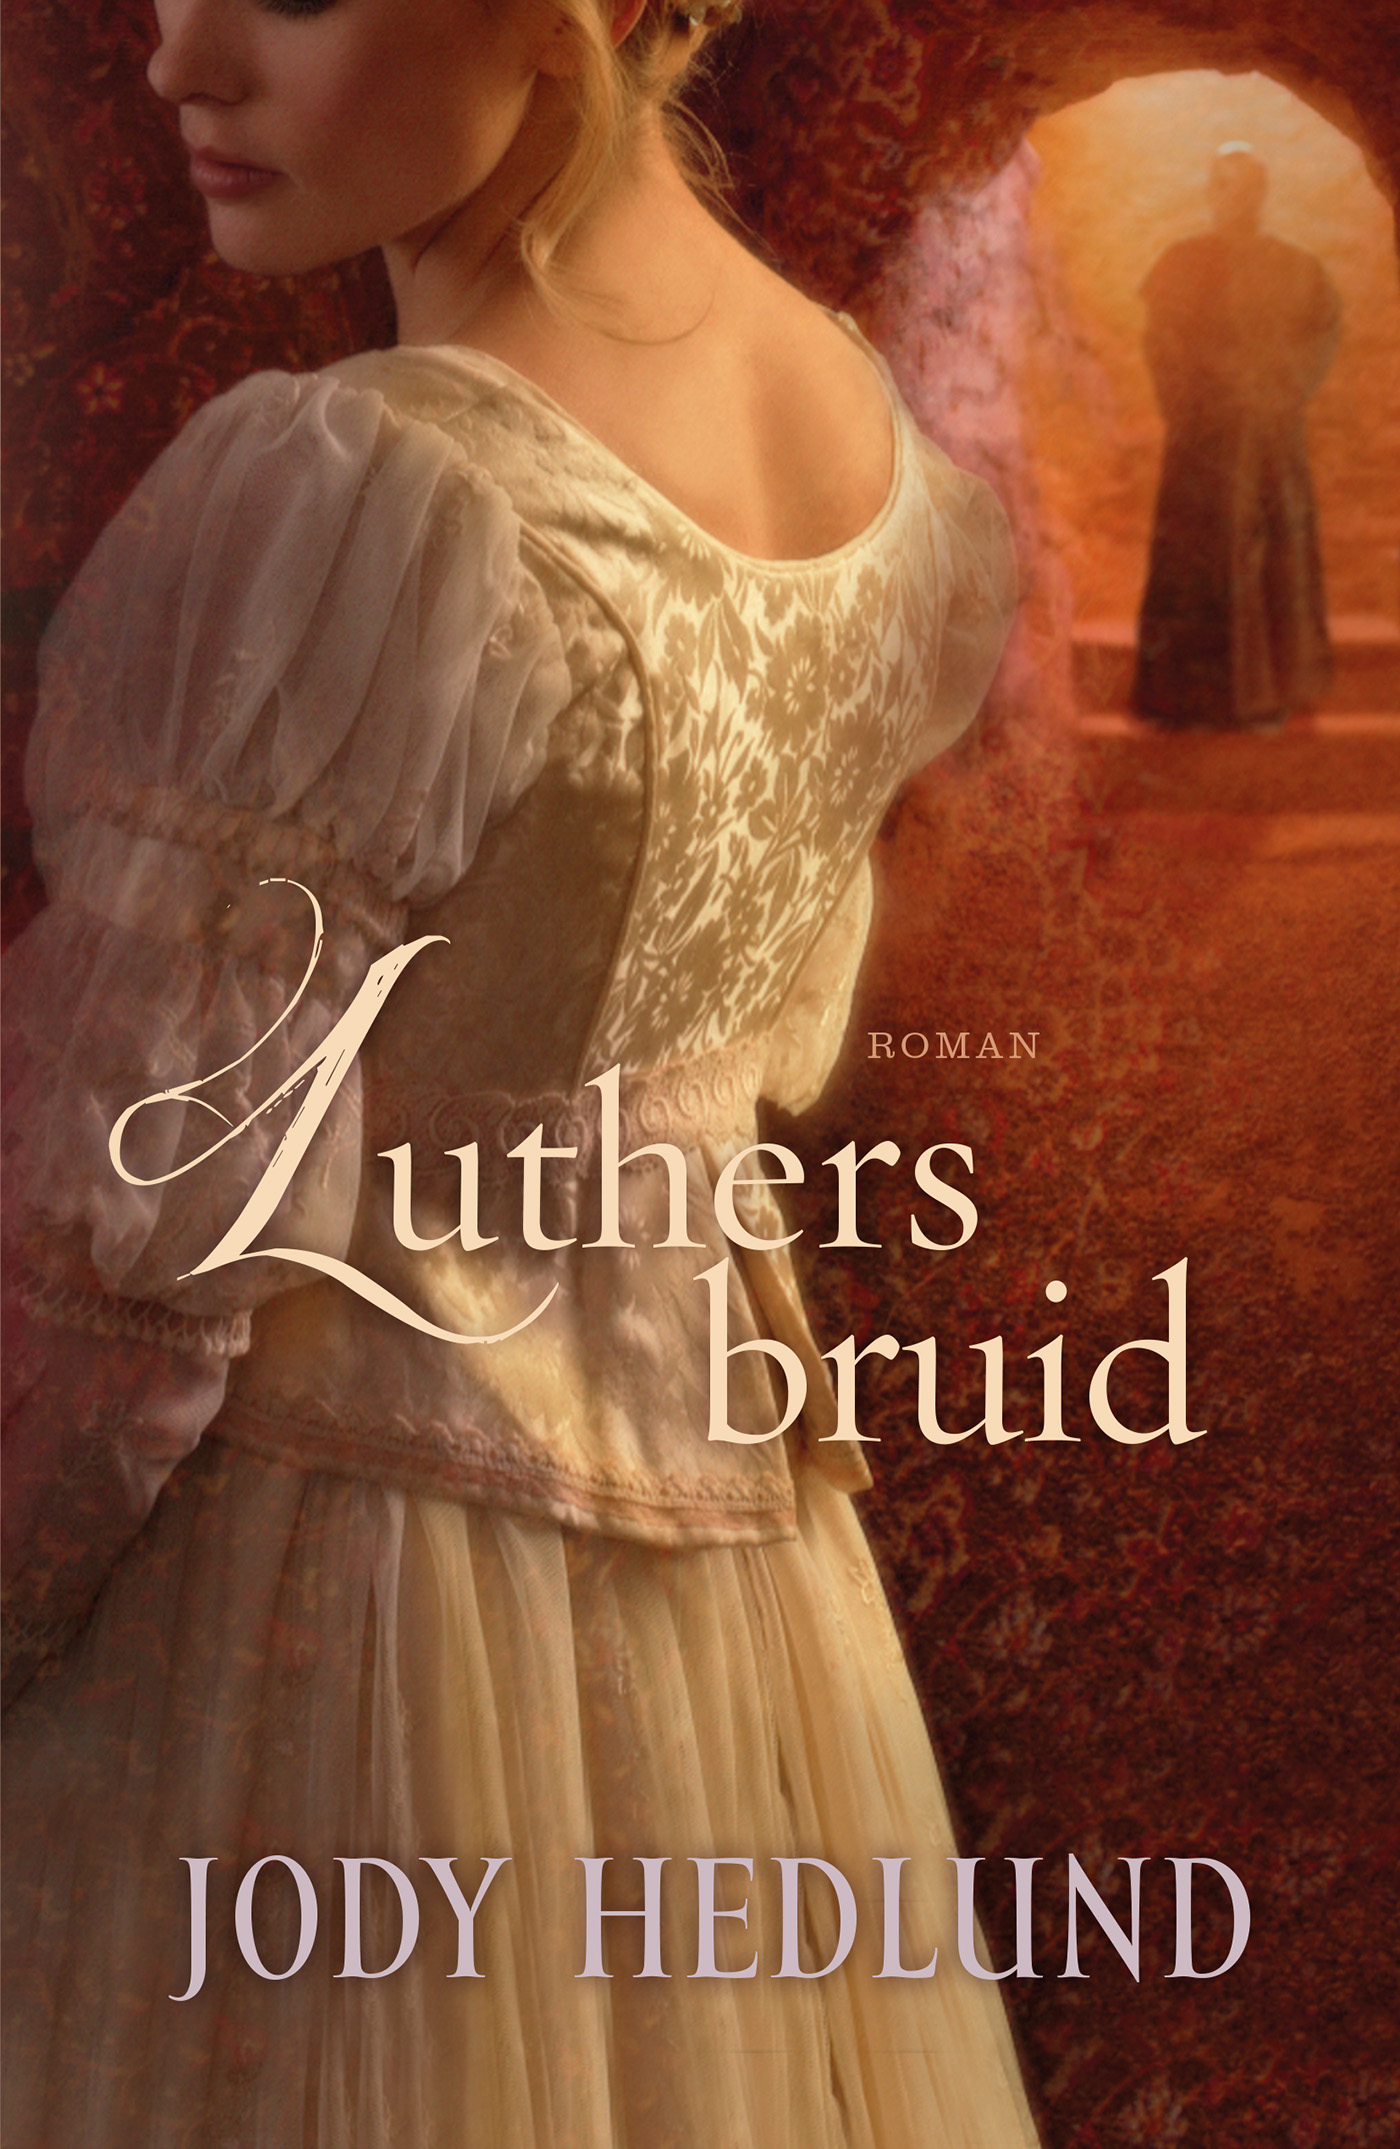 Luthers bruid (Ebook)